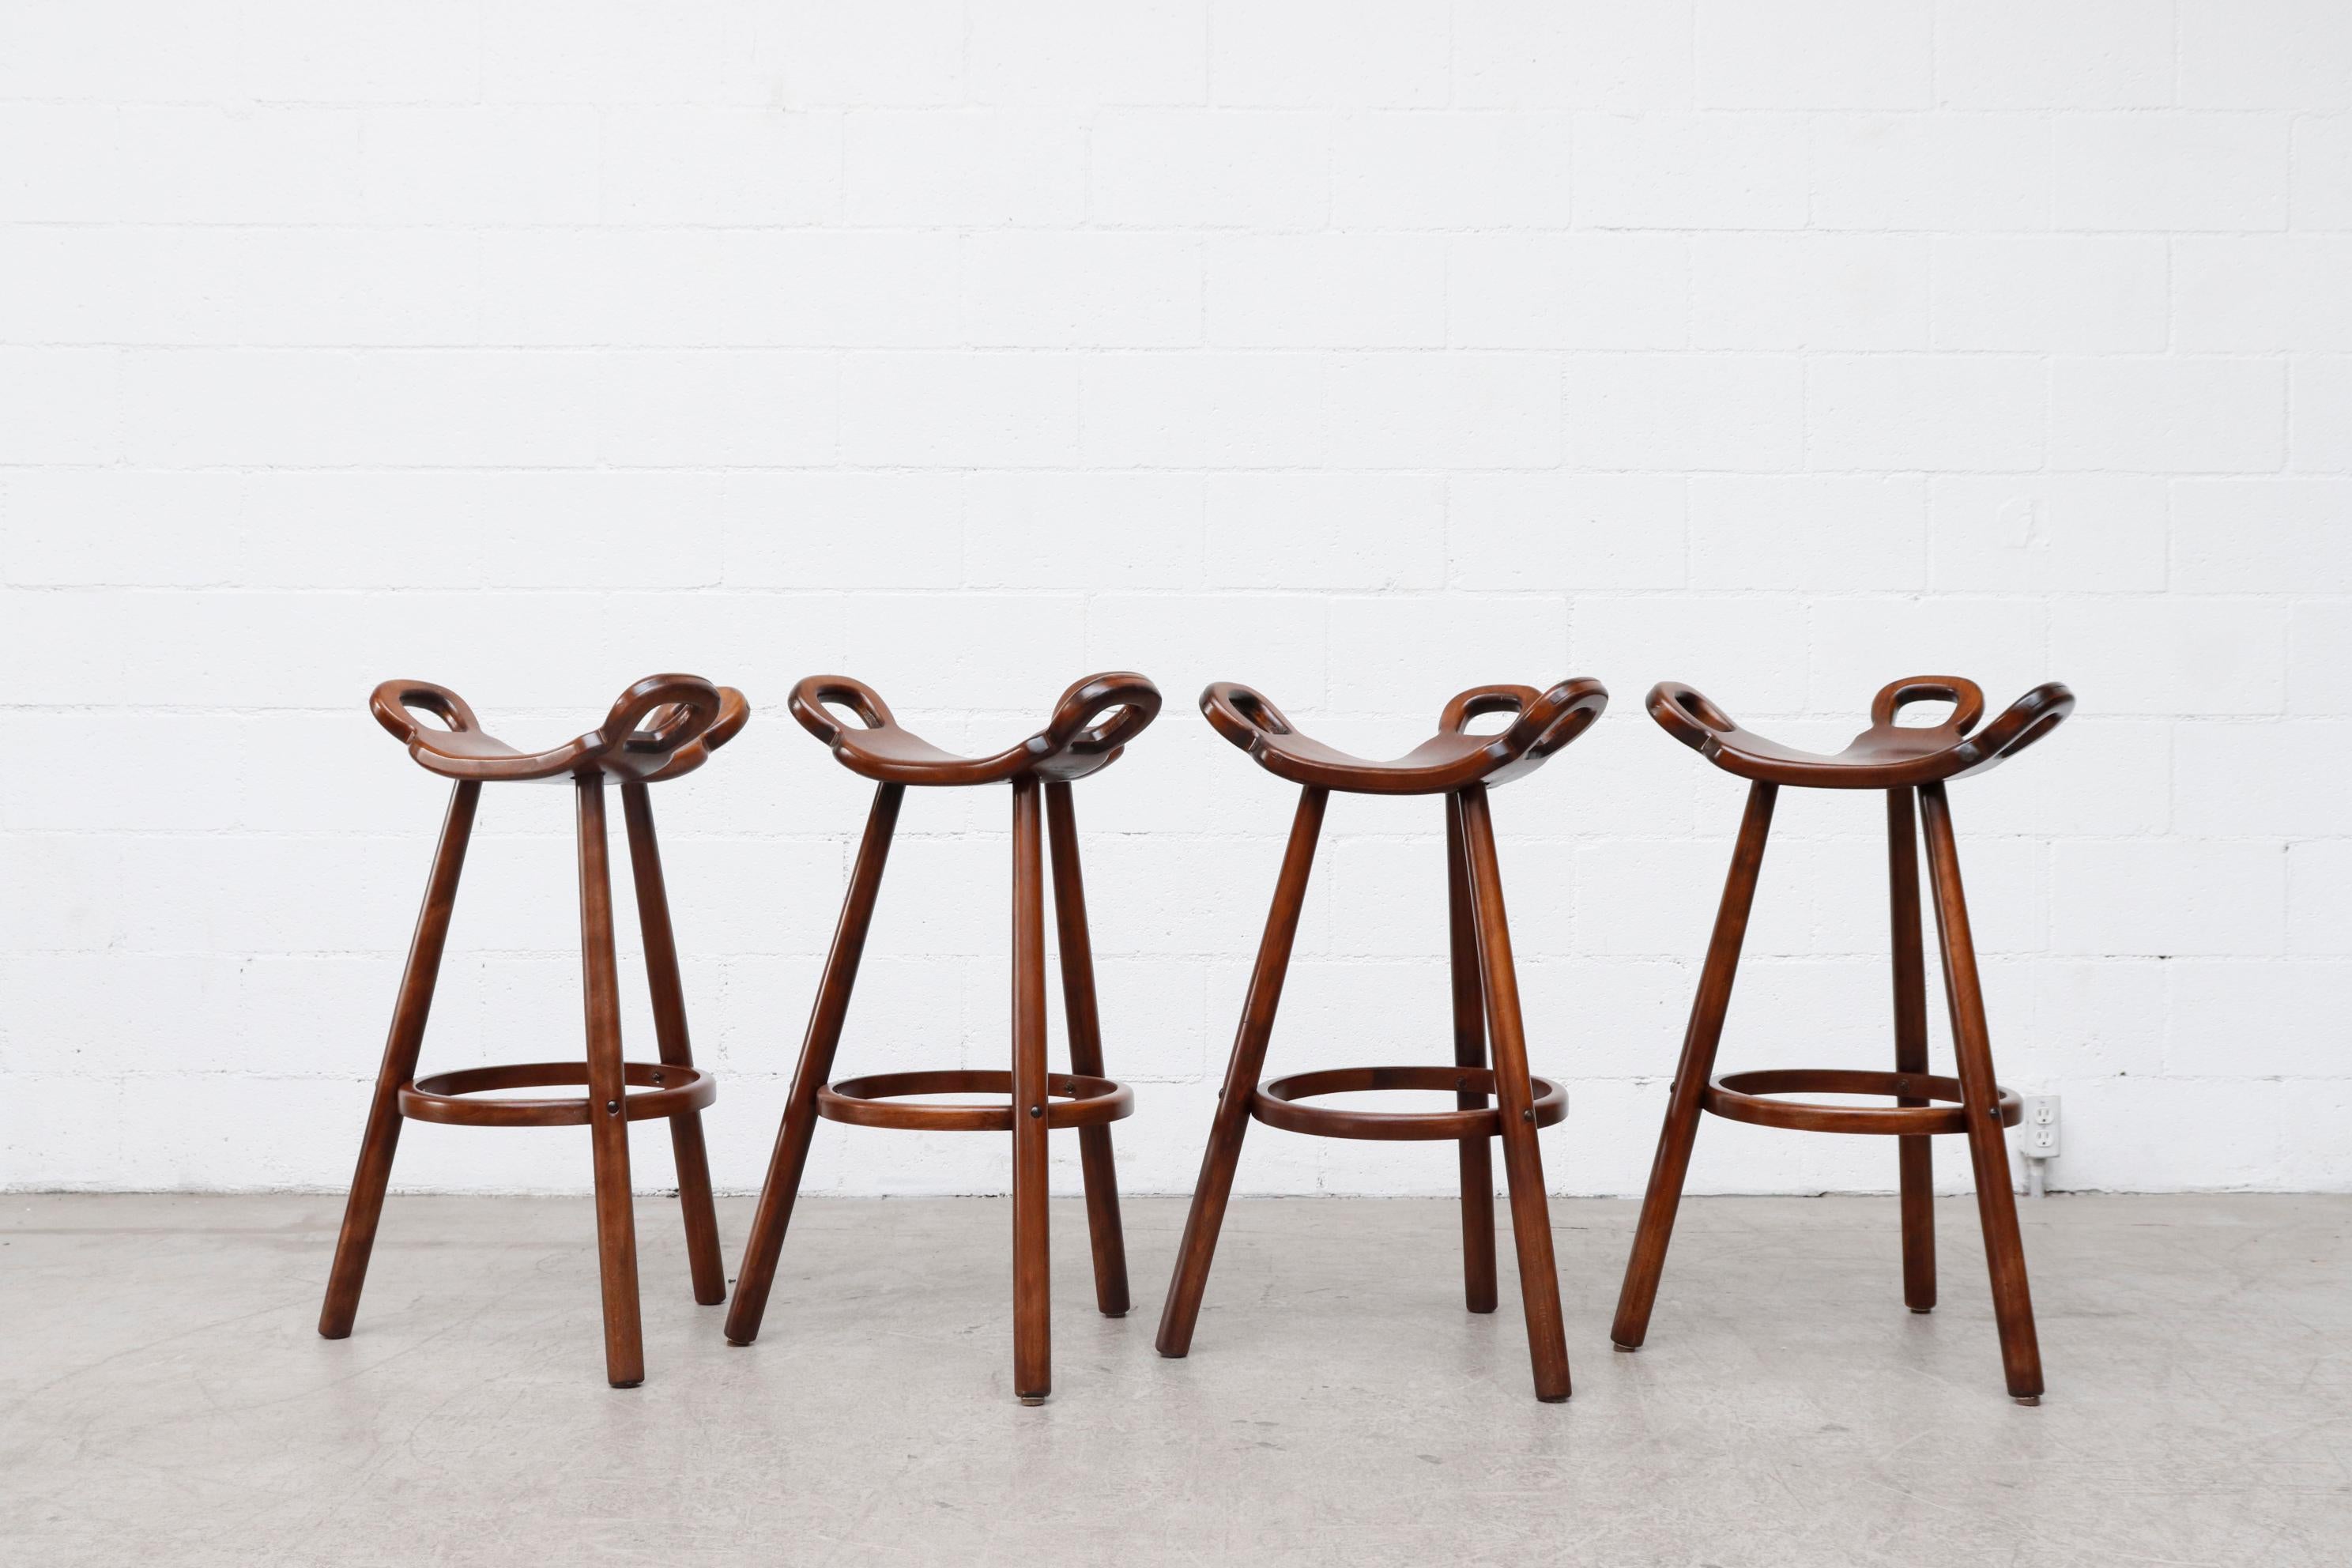 Set of 4 Sergio Rodrigues style Brutalist 'Marbella' bar stools by Confonorm. Organically carved seating and reverse tapered legs with wood footrests. Similar styles available with metal footrests. Listed separately. Set price.